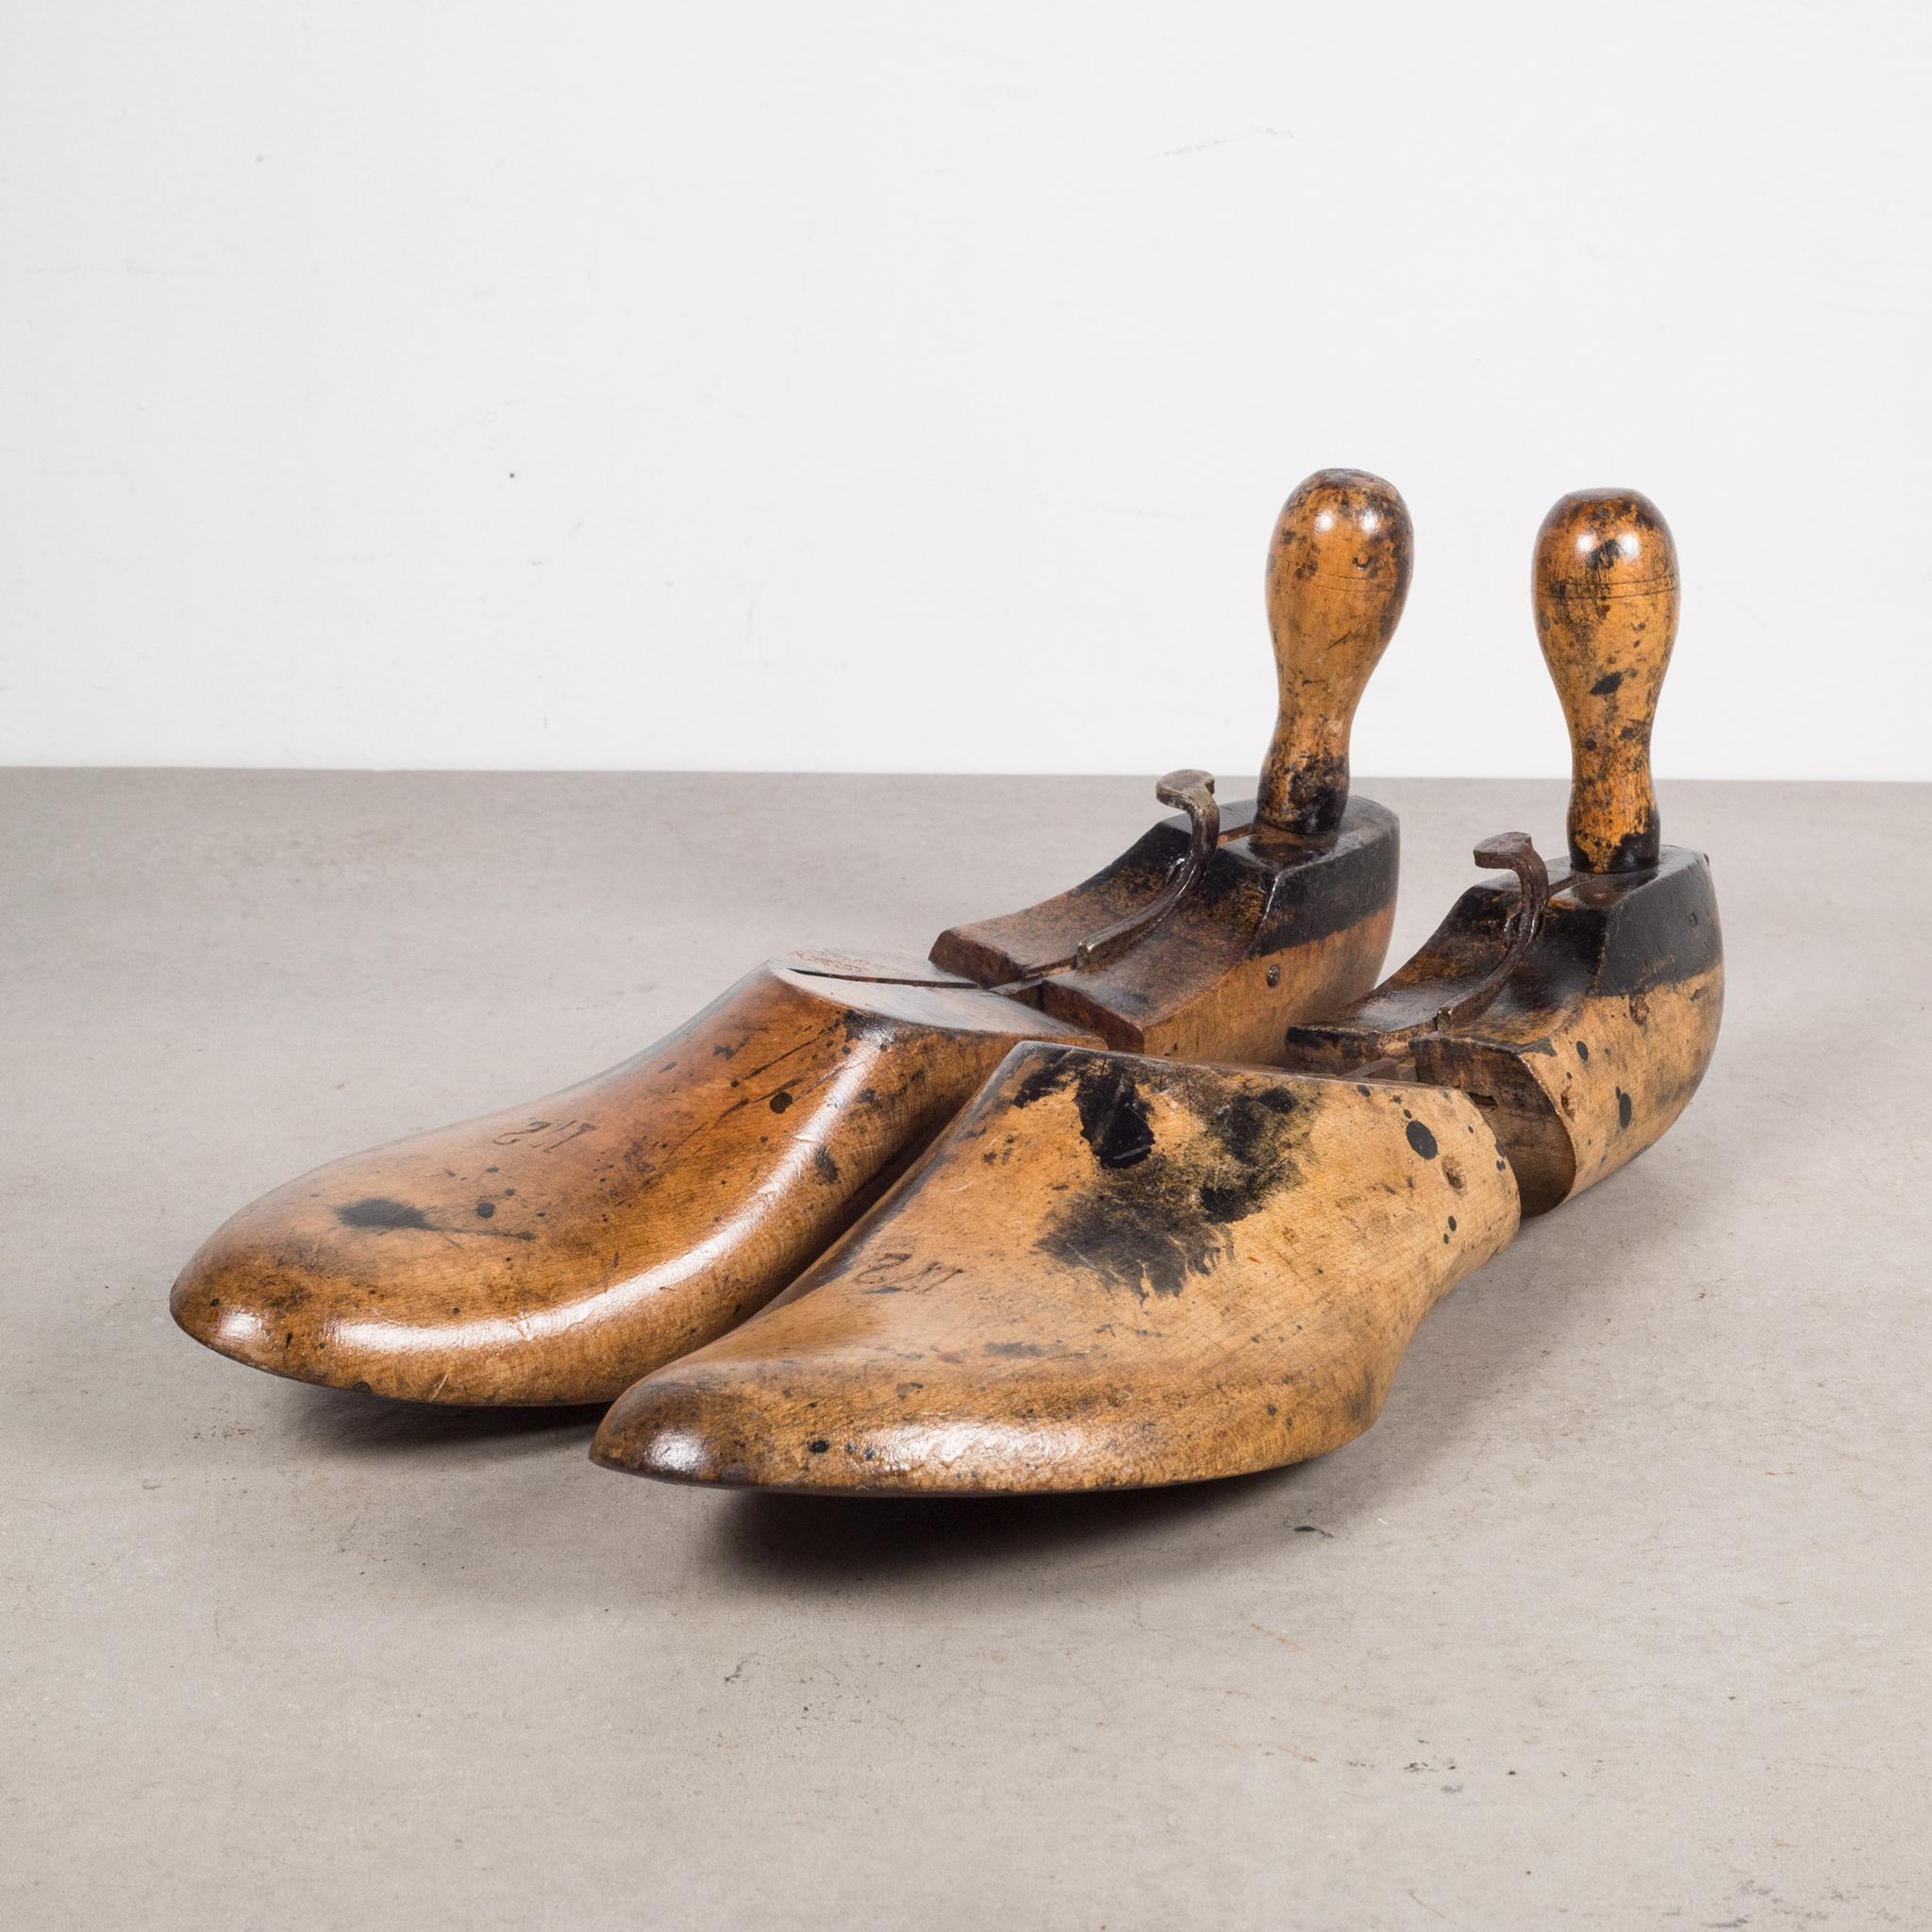 Original pairs of cobbler's wooden shoe forms. They have retained their original finish and have the appropriate wear.

Creator unknown.
Date of manufacture c.1920
Materials and techniques maple or beech.
Condition good. Wear consistent with